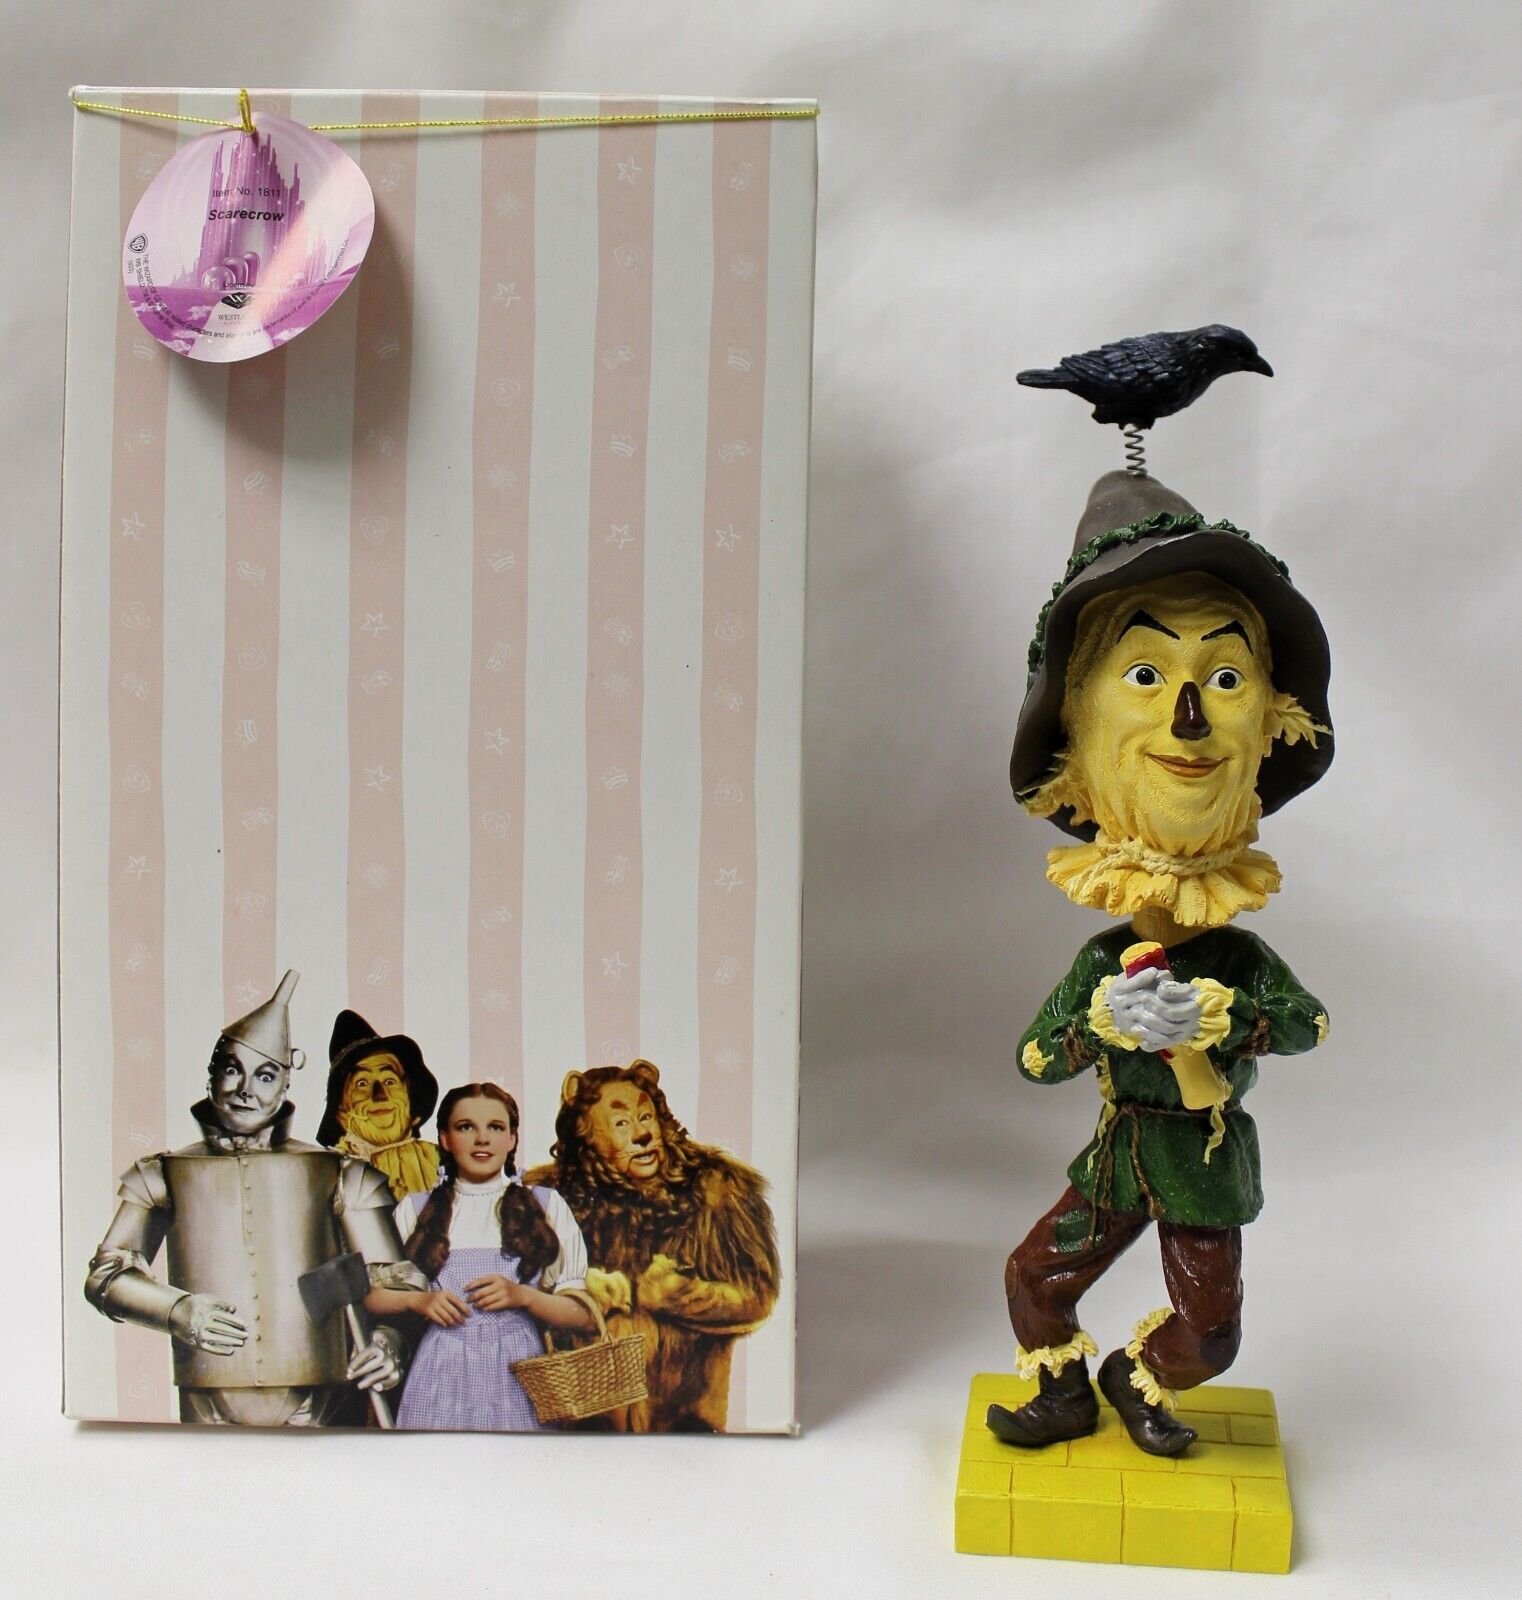 The Wizard Of Oz Scarecrow Bobble Head Westland Giftware NEW in box #1811